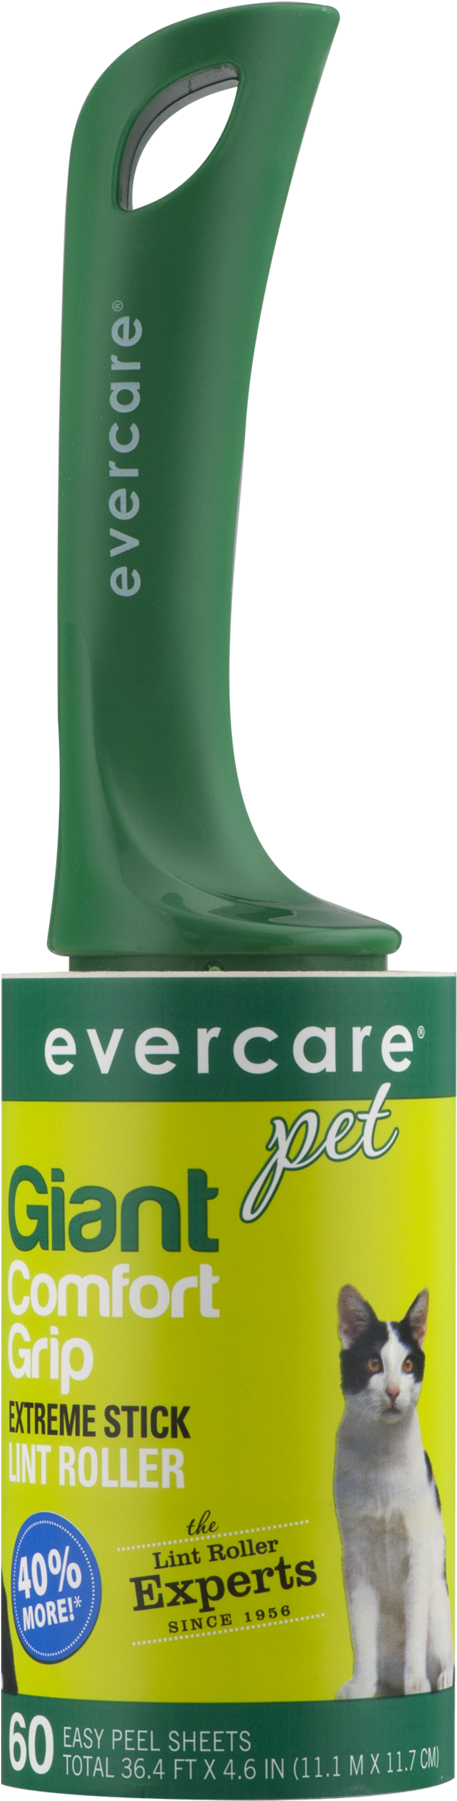 Evercare Pet Giant Comfort Grip Extreme Stick Lint - Evercare Ergo Grip Extreme Stick Lint Roller, 60 Sheets (1800x1800), Png Download